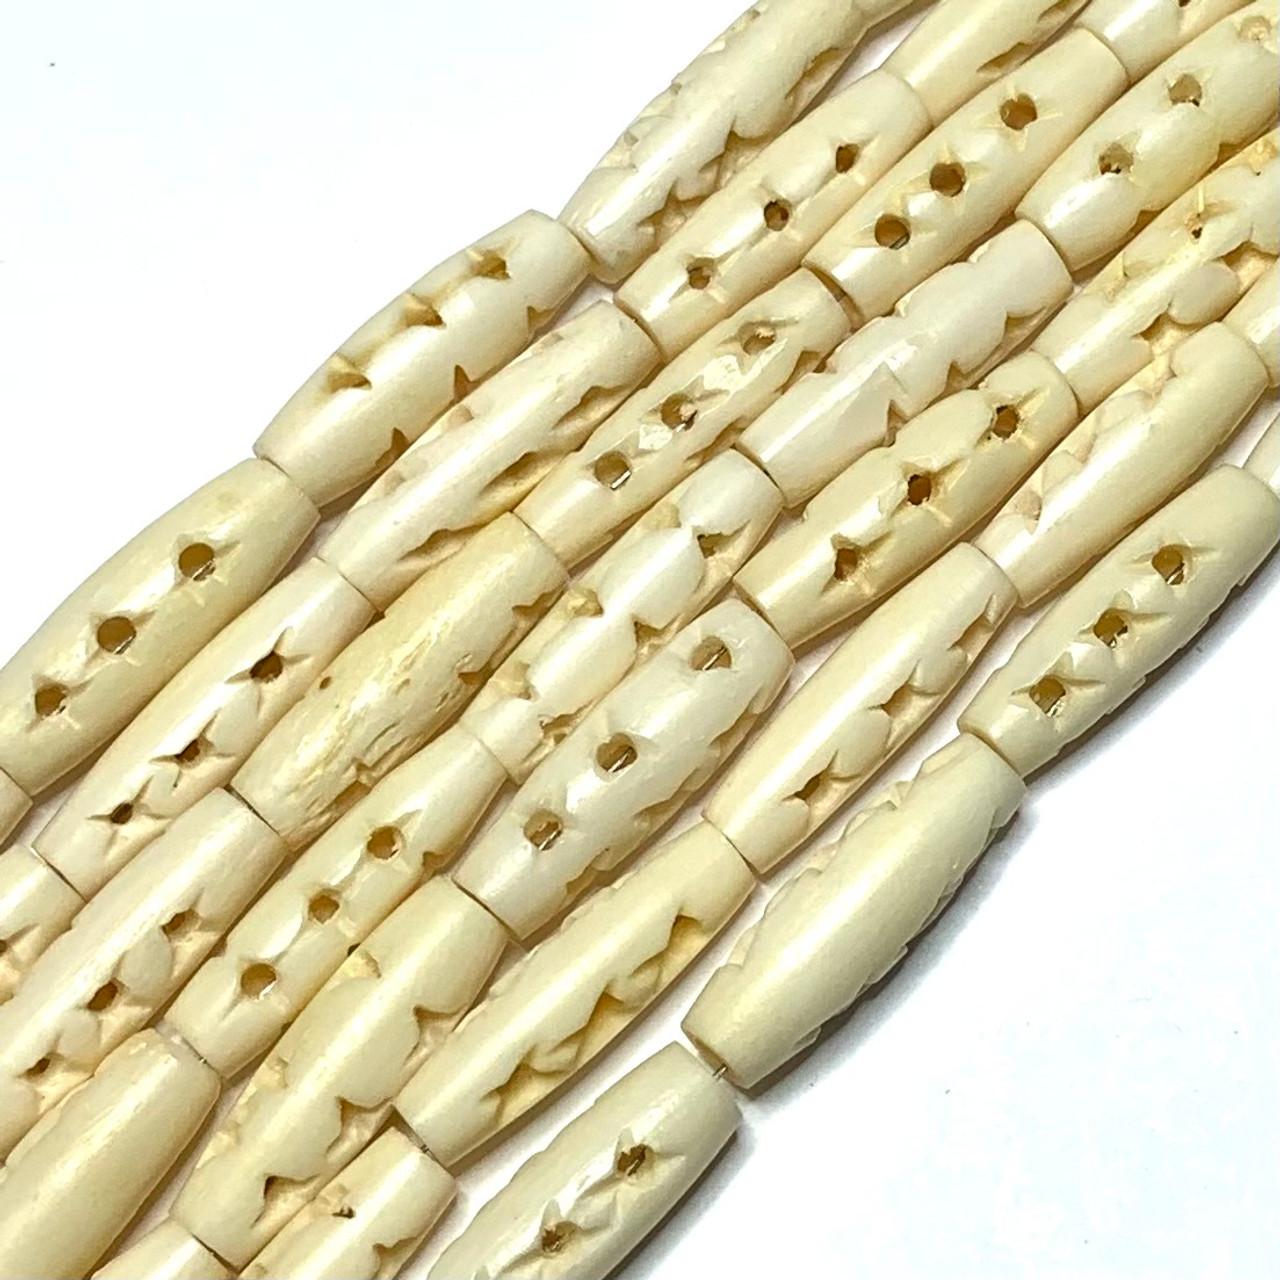 BD02425, carved bone beads, India, made in India, hand carved bone beads,  4mm bone beads, bovine, Indian bone beads, bleached bone, off white bone  beads, creamy white bone beads, tube beads, exotic